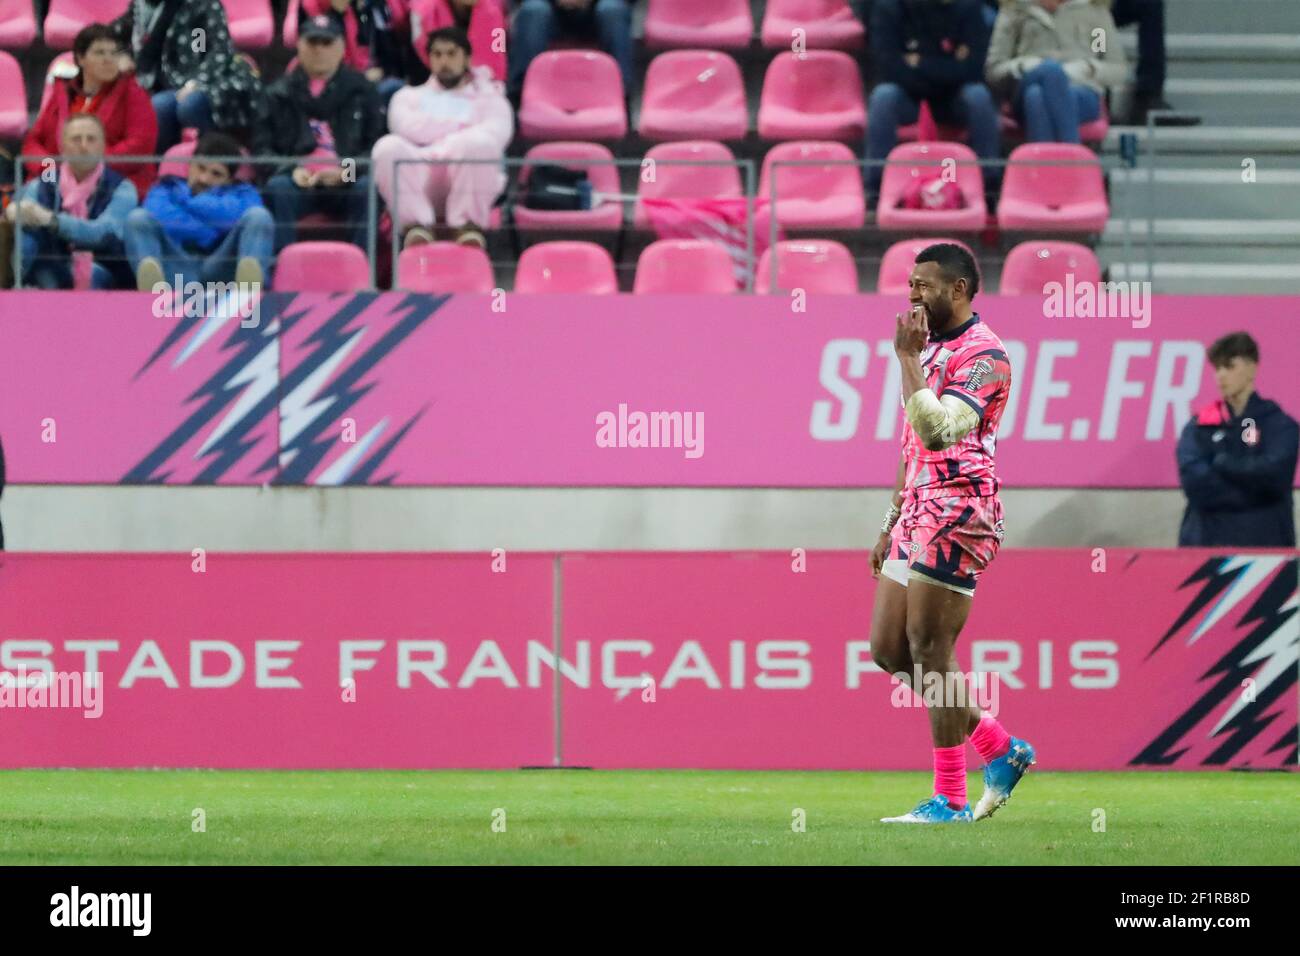 W. Nayacalevu Vuidravuwalu (Stade Francais Paris) during the French  championship Top 14 rugby union match between Stade Francais Paris and Lyon  OU on February 16, 2019 at Jean Bouin stadium in Paris,